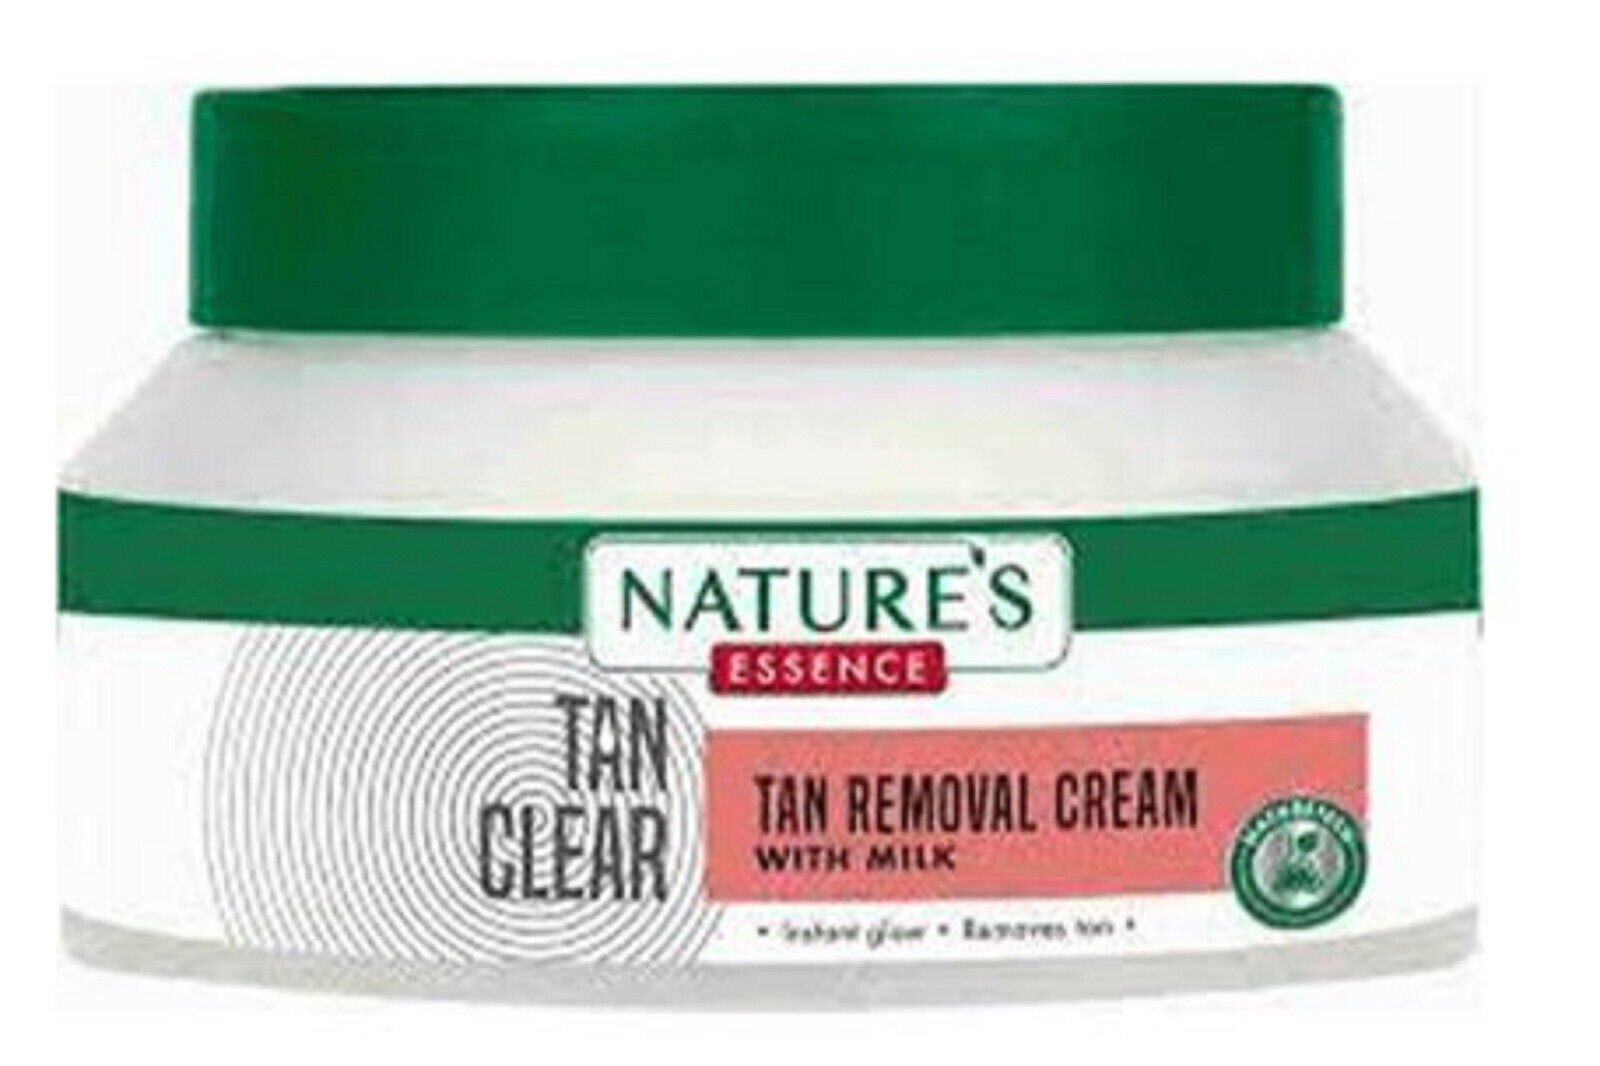 Nature's Essence Tan Removal Cream With